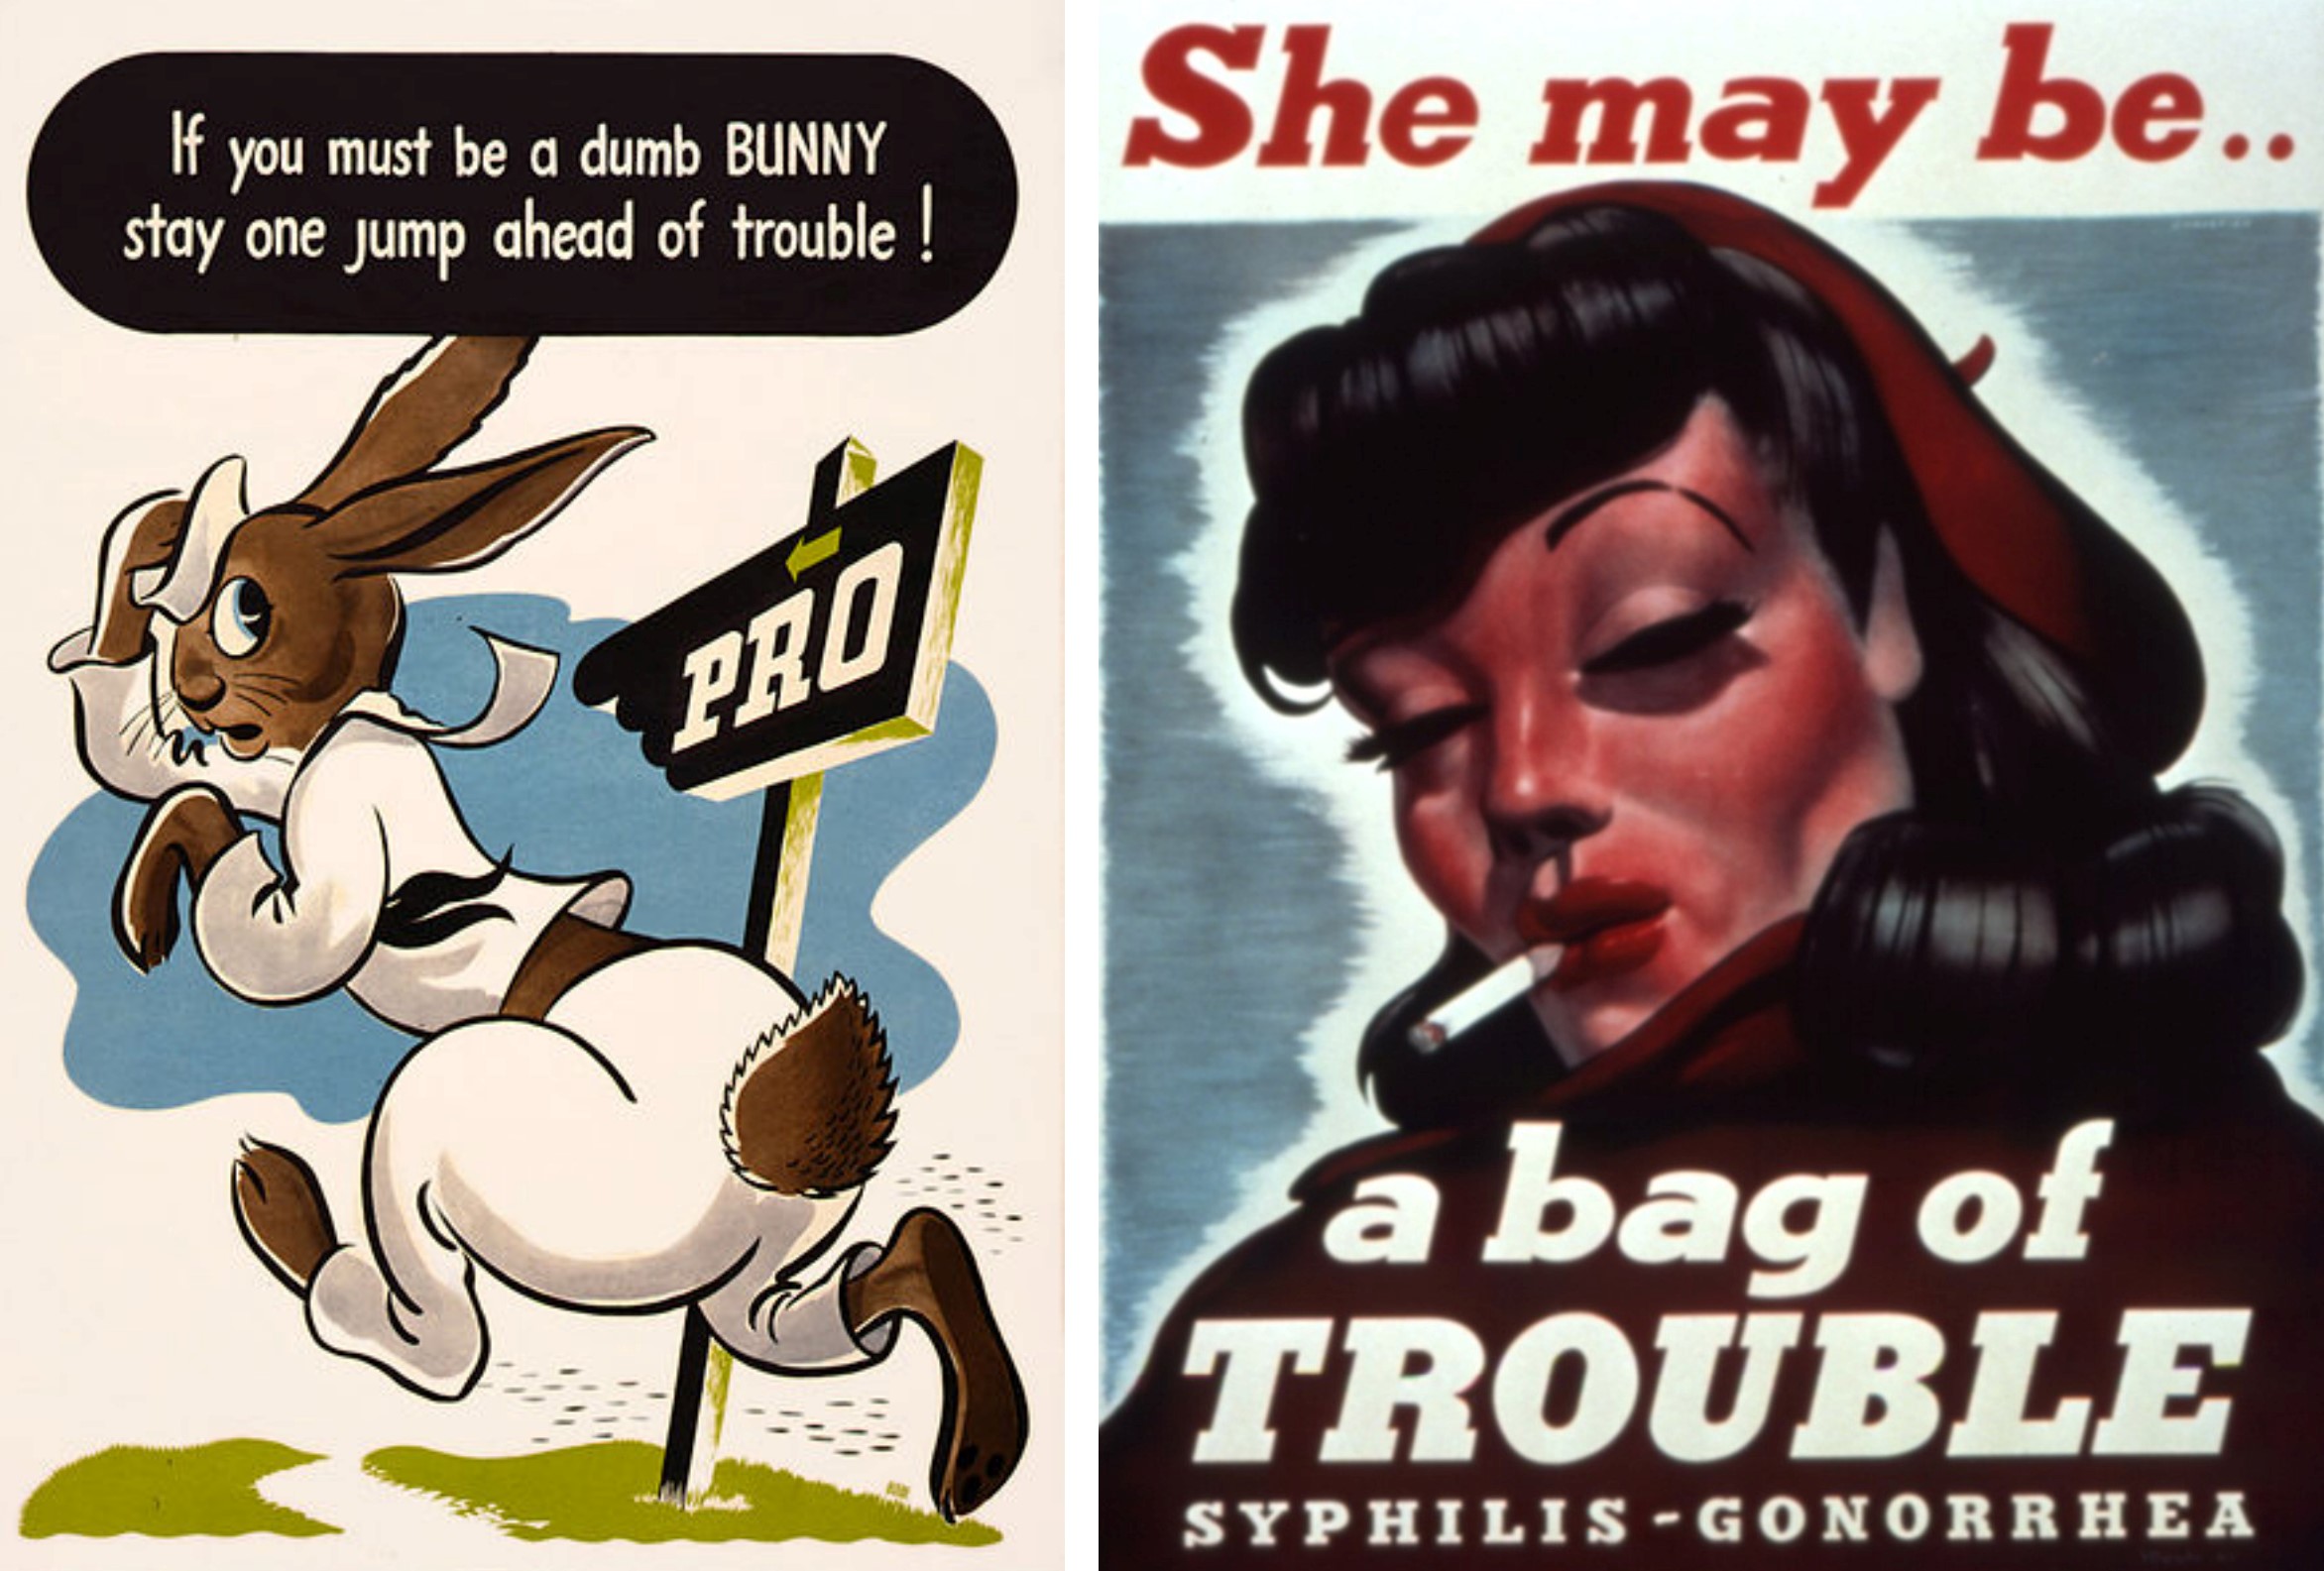 On the left, government propaganda encouraging the use of 'Pro Kits.' On the right, government propaganda emphasizing the image of women as carriers of VD.